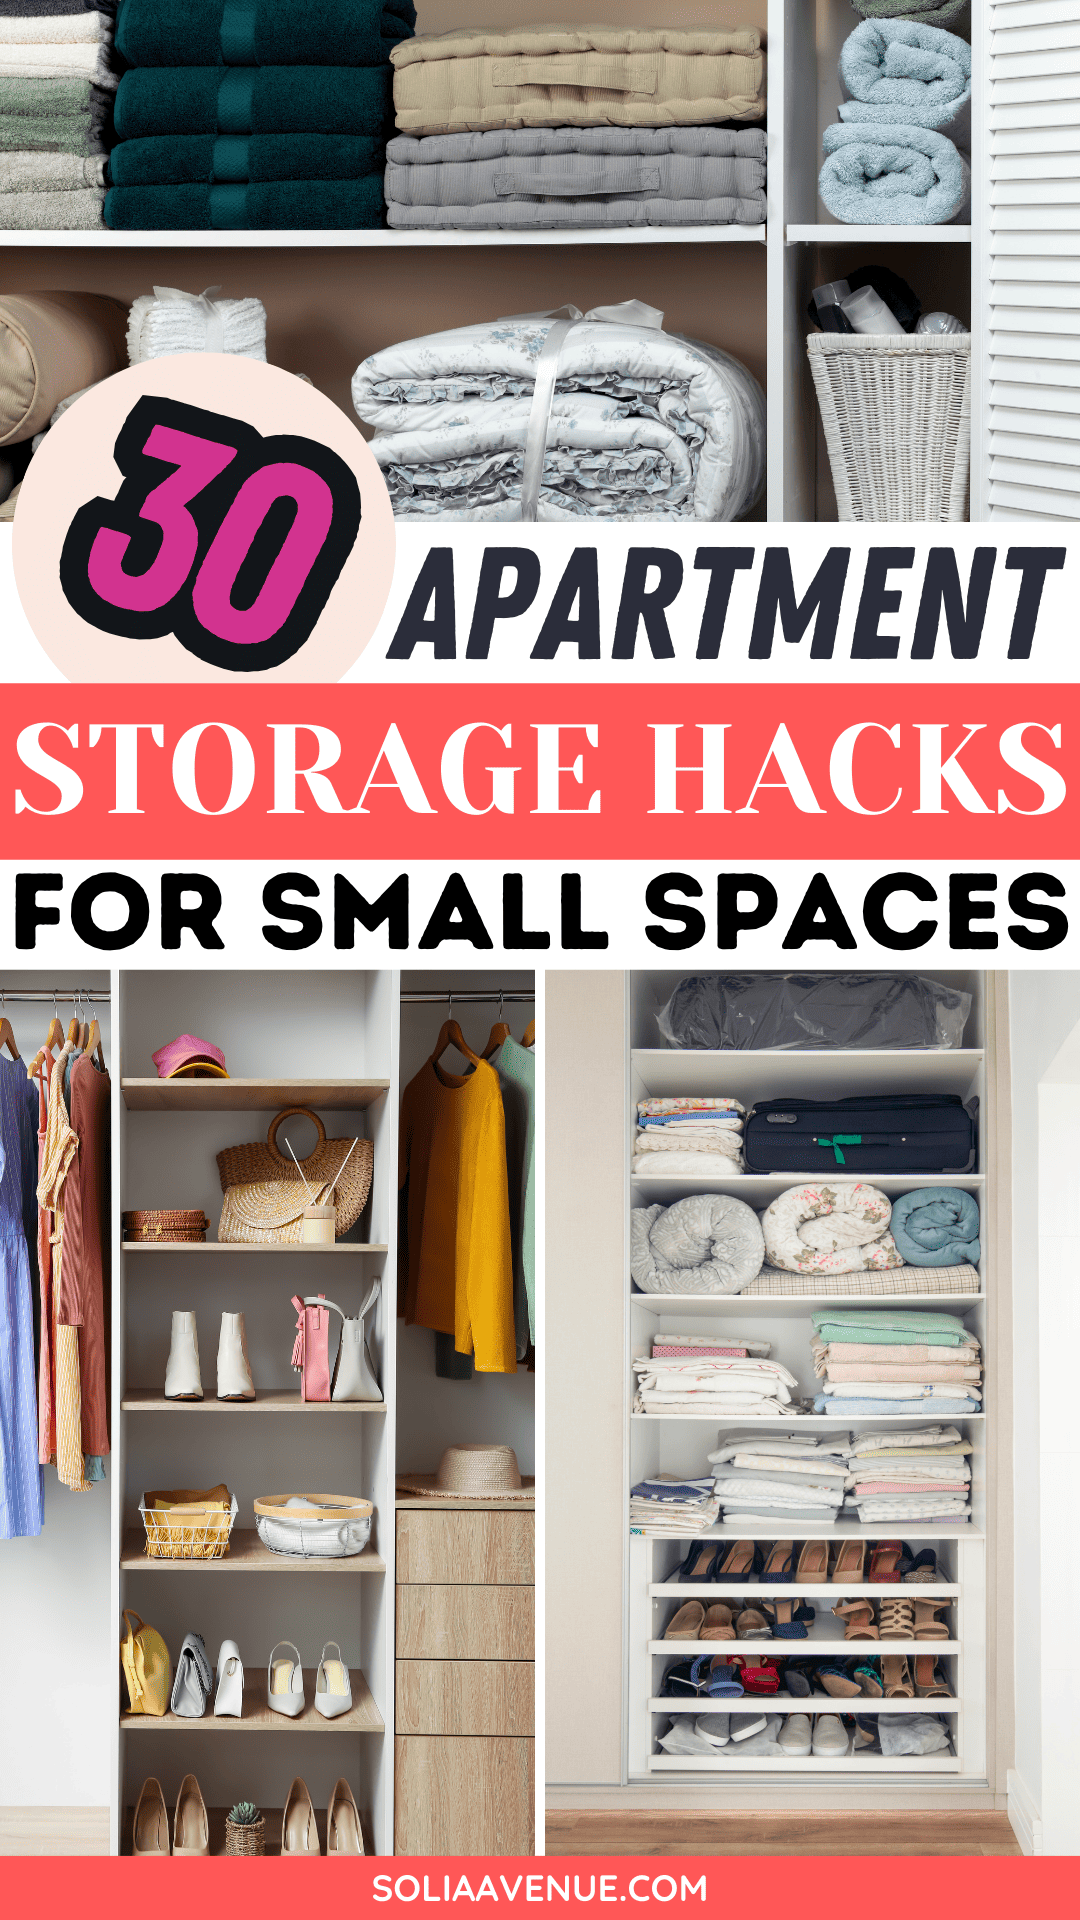 Discover 30 ingenious apartment organization hacks to maximize space in your small space. Transform clutter into stylish, functional living!